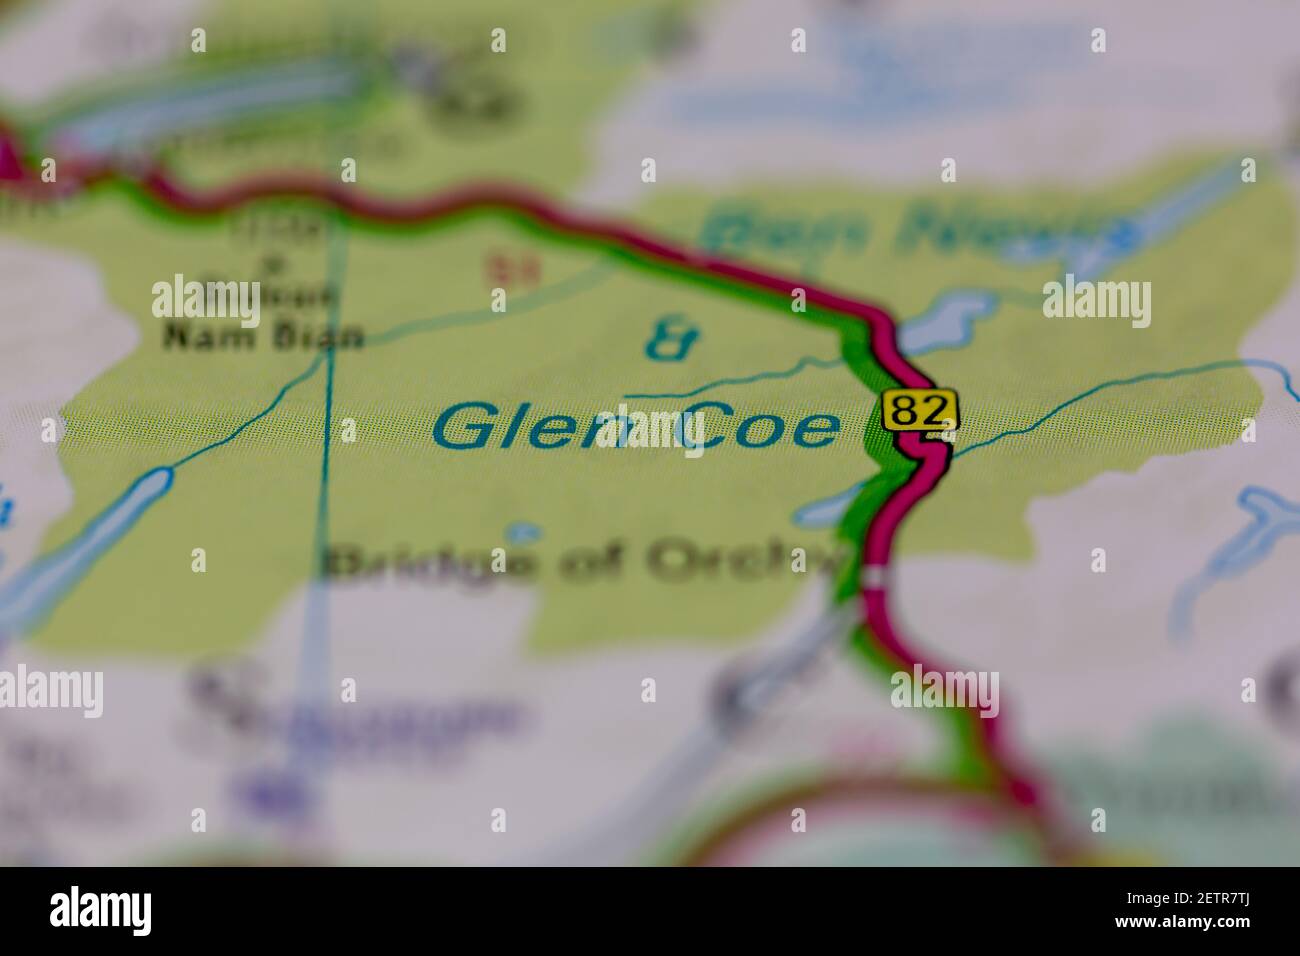 Glen coe Shown on a road map or Geography map and atlas Stock Photo